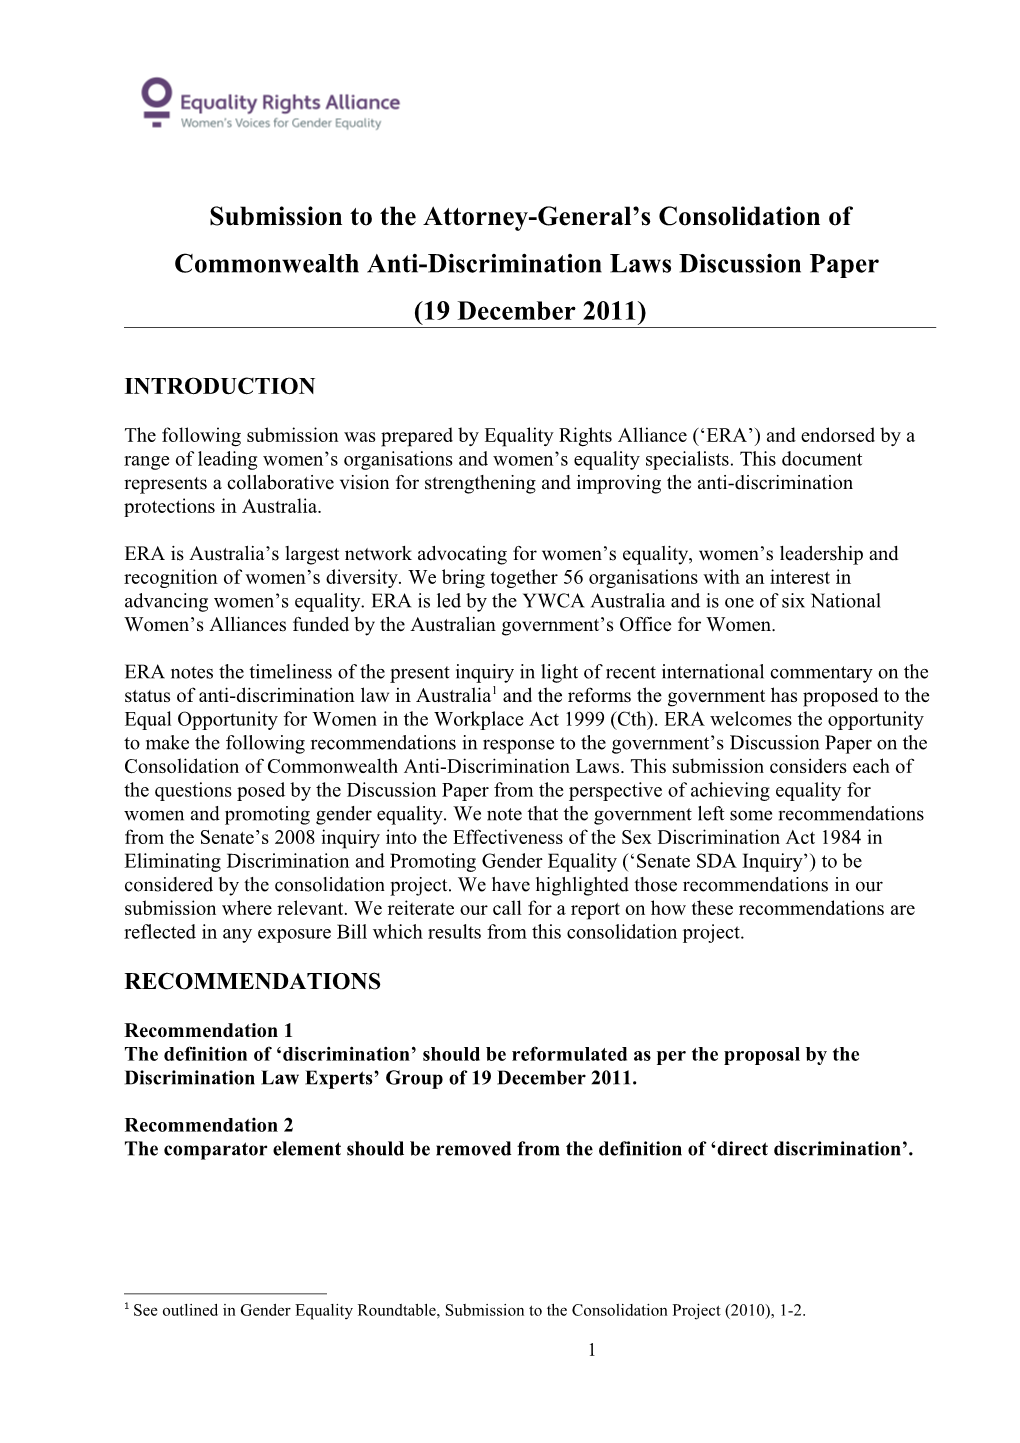 Submission on the Consolidation of Commonwealth Anti-Discrimination Laws - Equality Rights